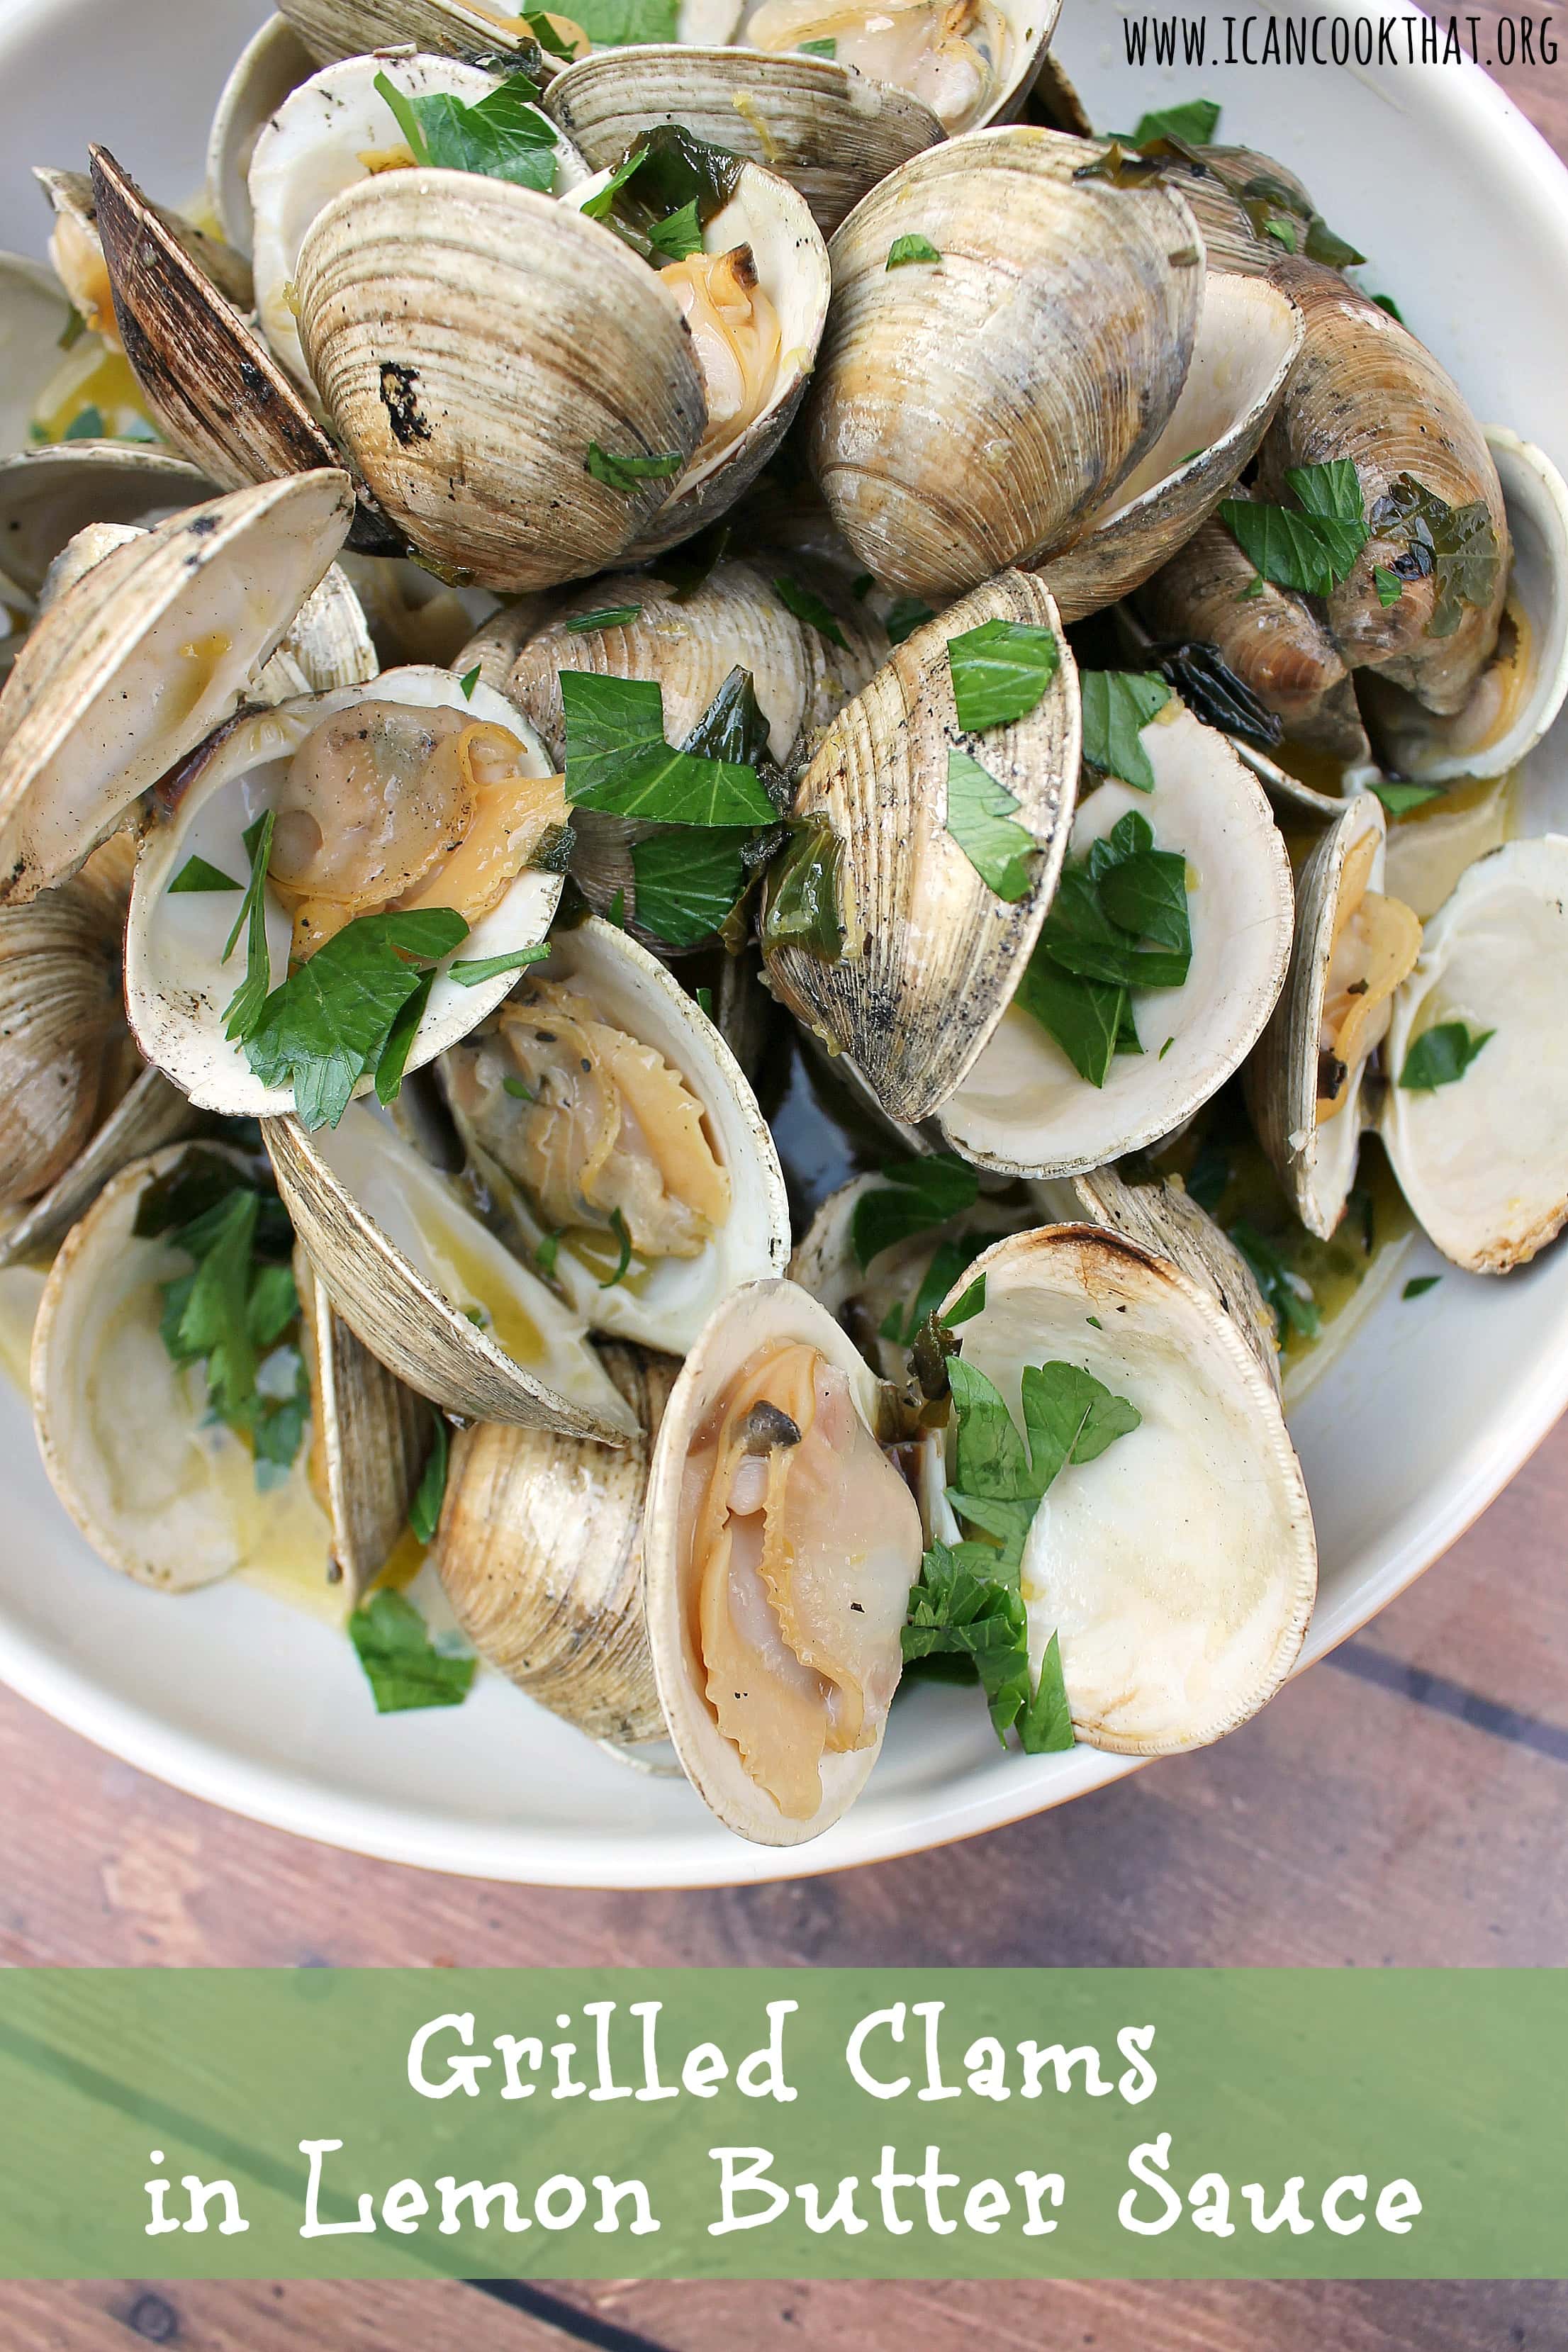 Grilled Clams in Lemon Butter Sauce